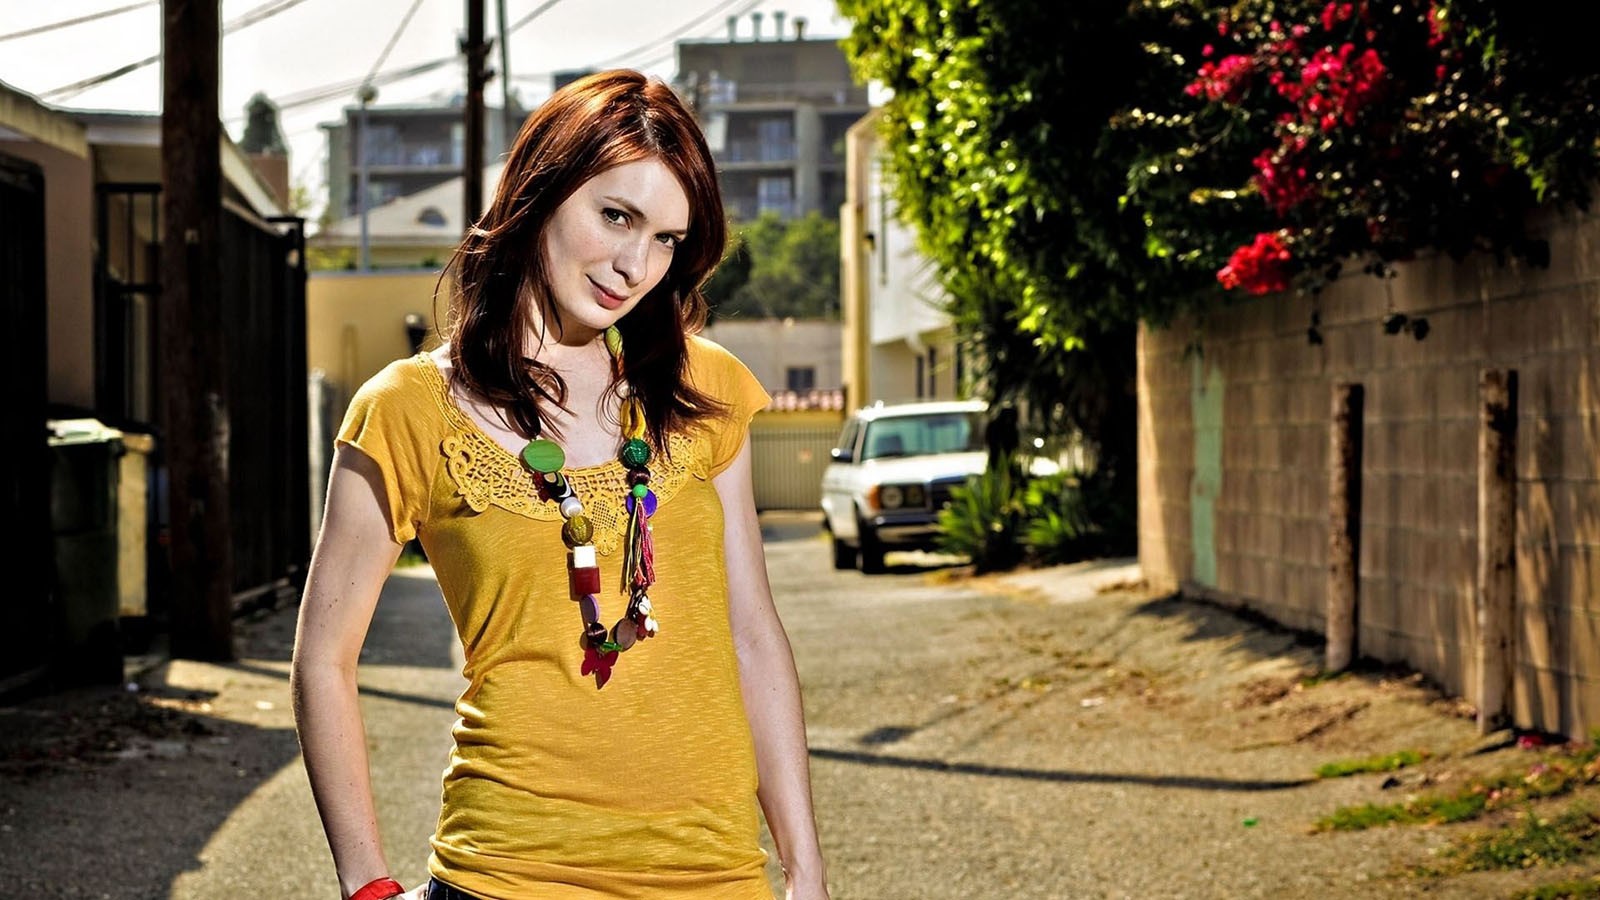 People 1600x900 Felicia Day actress women women outdoors brunette looking at viewer urban standing necklace yellow shirt alleyway